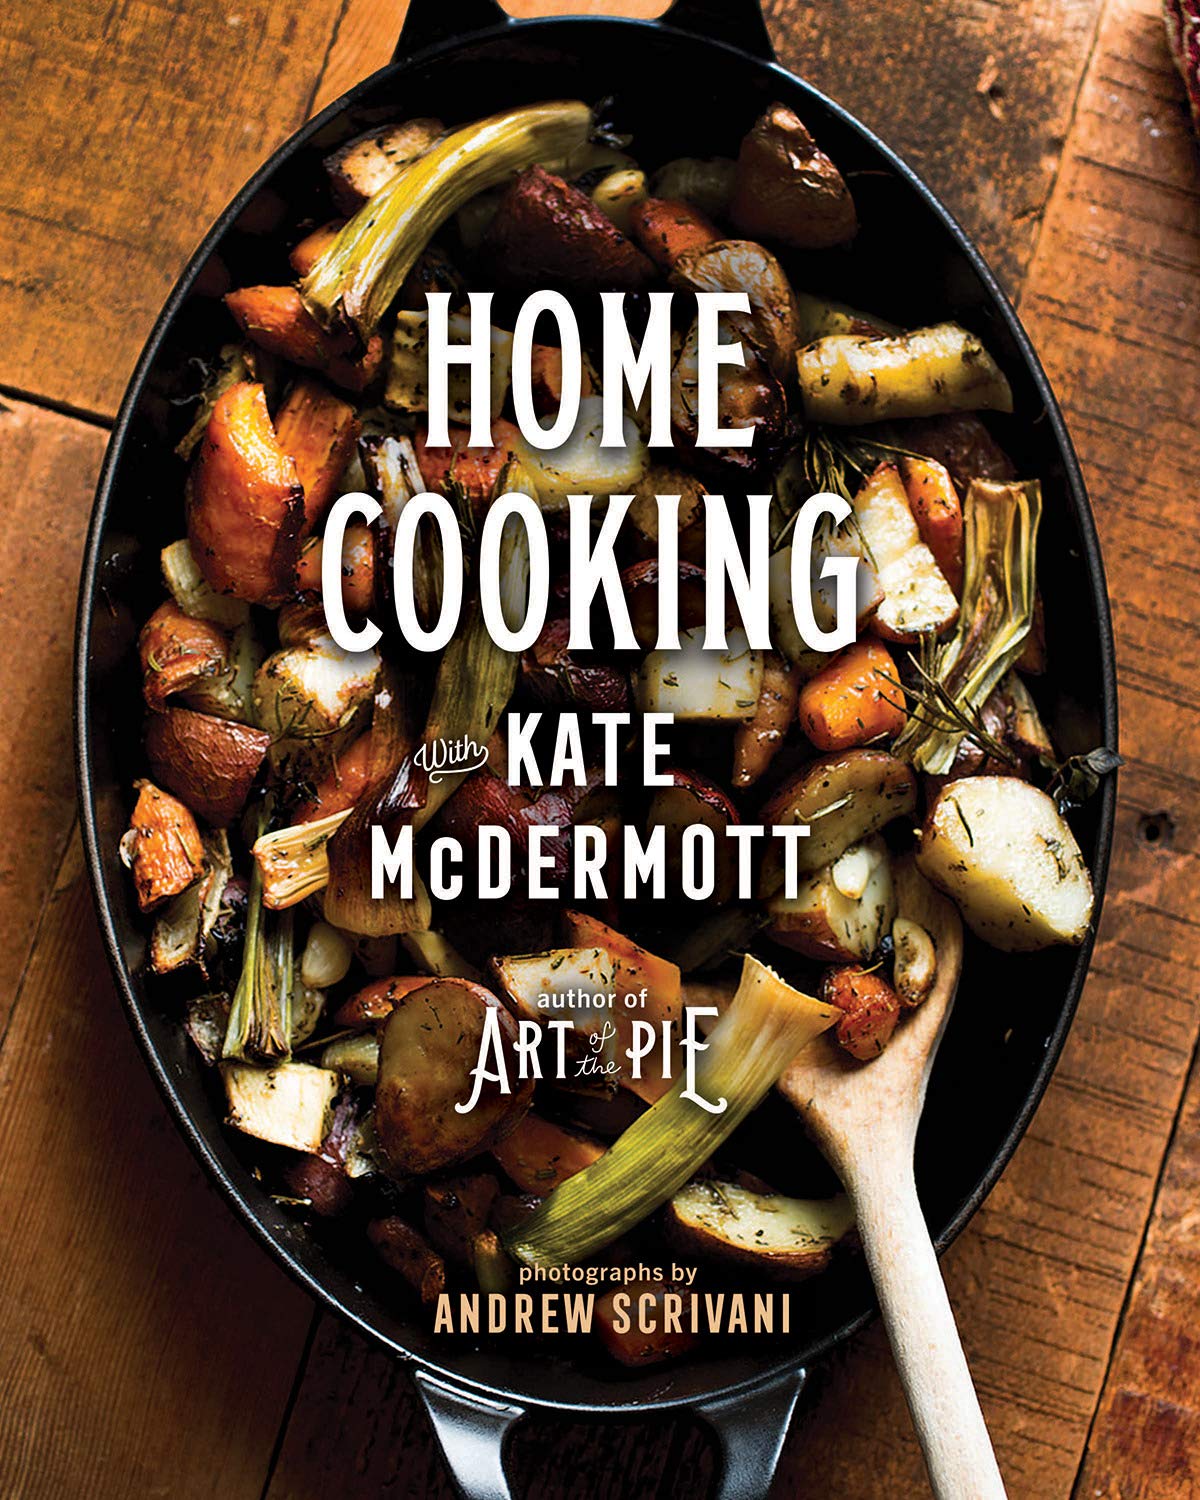 Home Cooking with Kate McDermott cover on eatlivetravelwrite.com